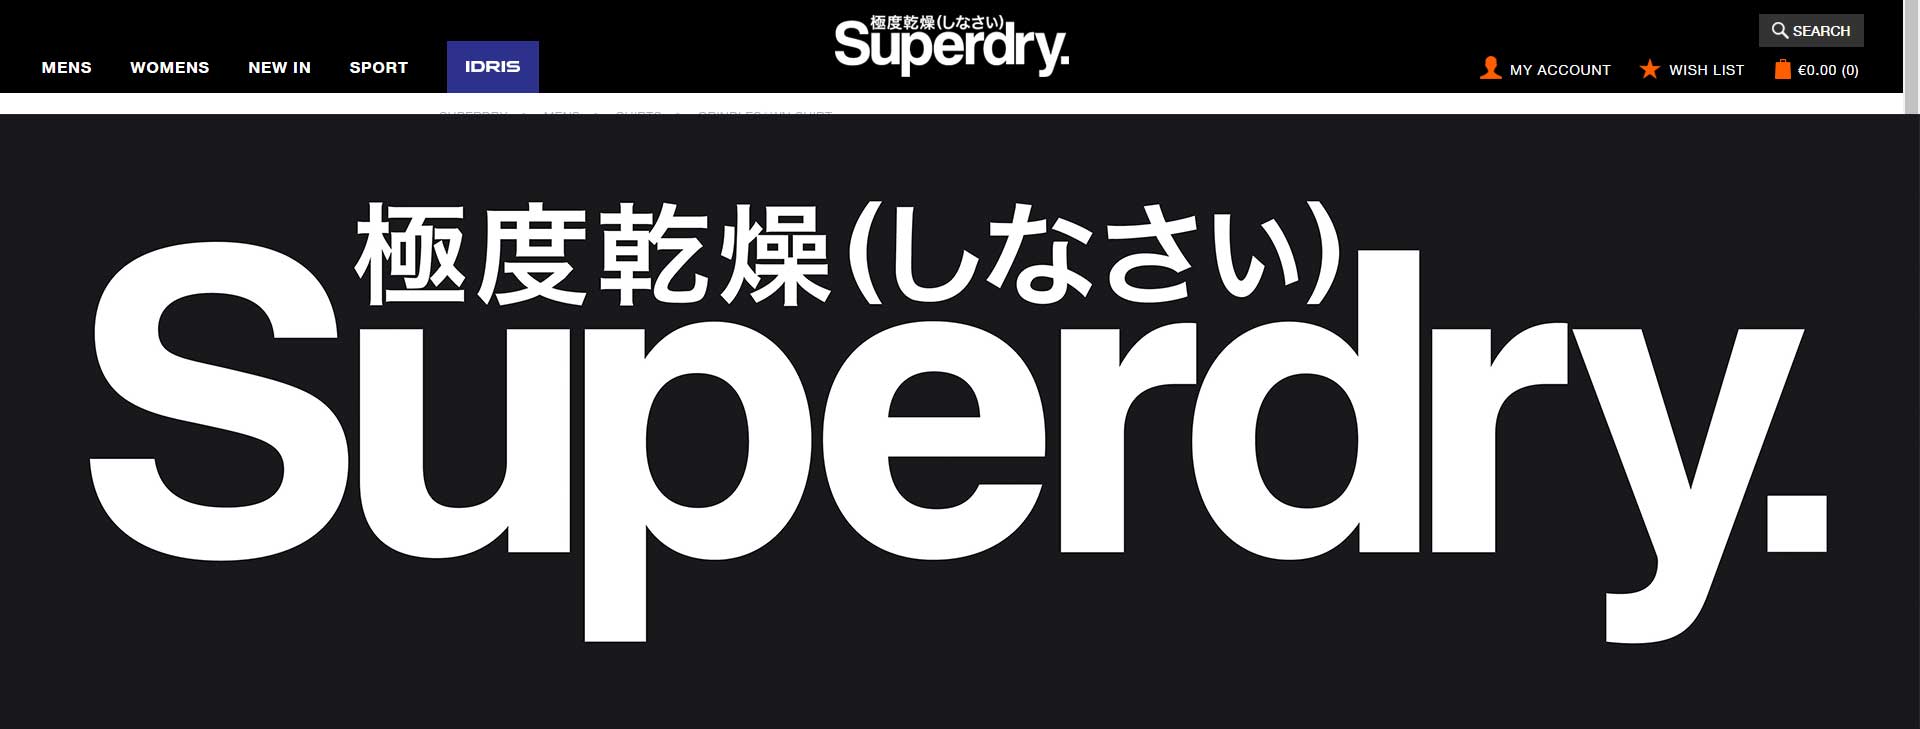 superdry-featured